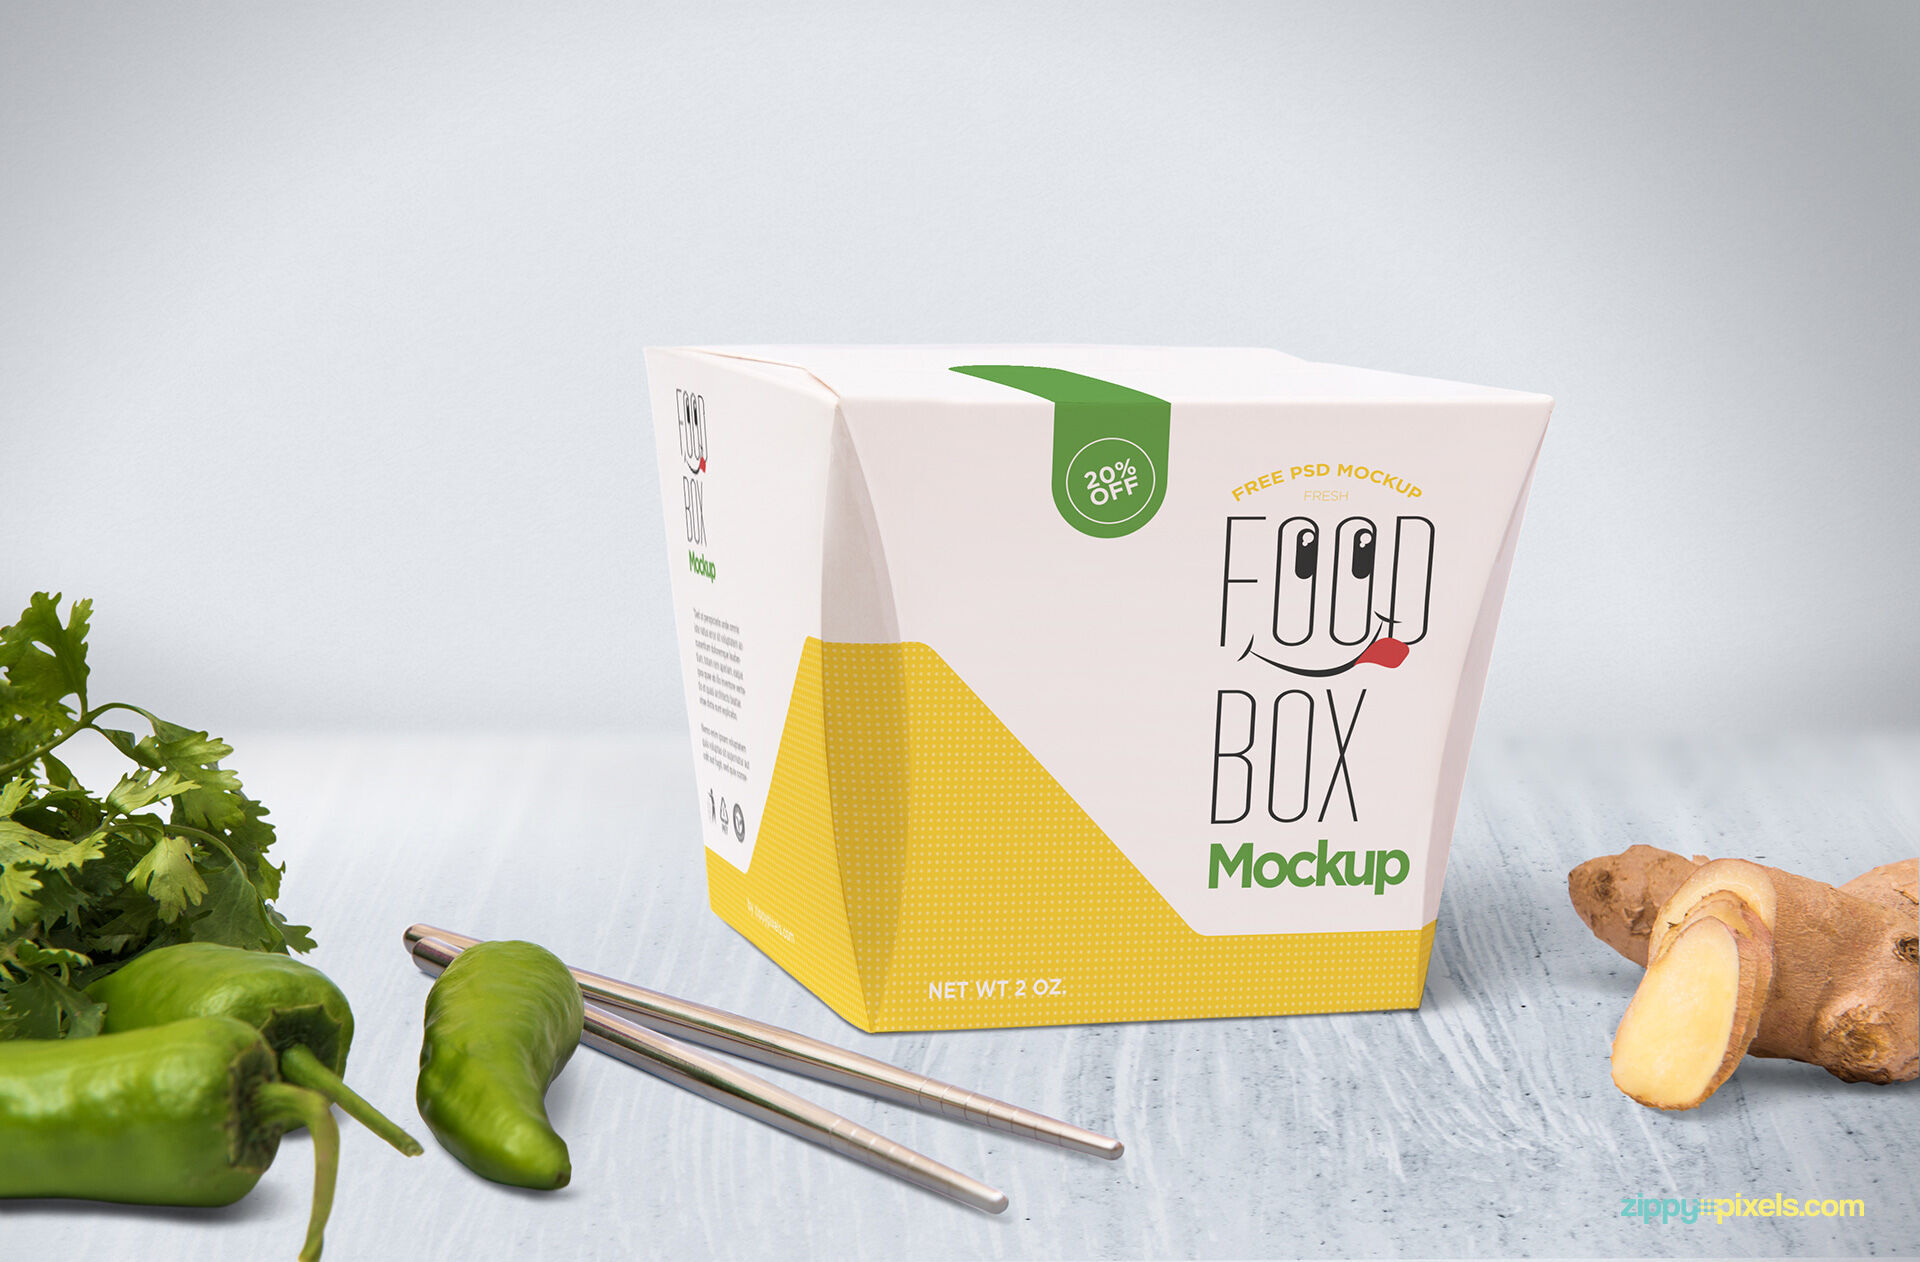 3/4 View of Realistic Food Box Packaging Mockup FREE PSD